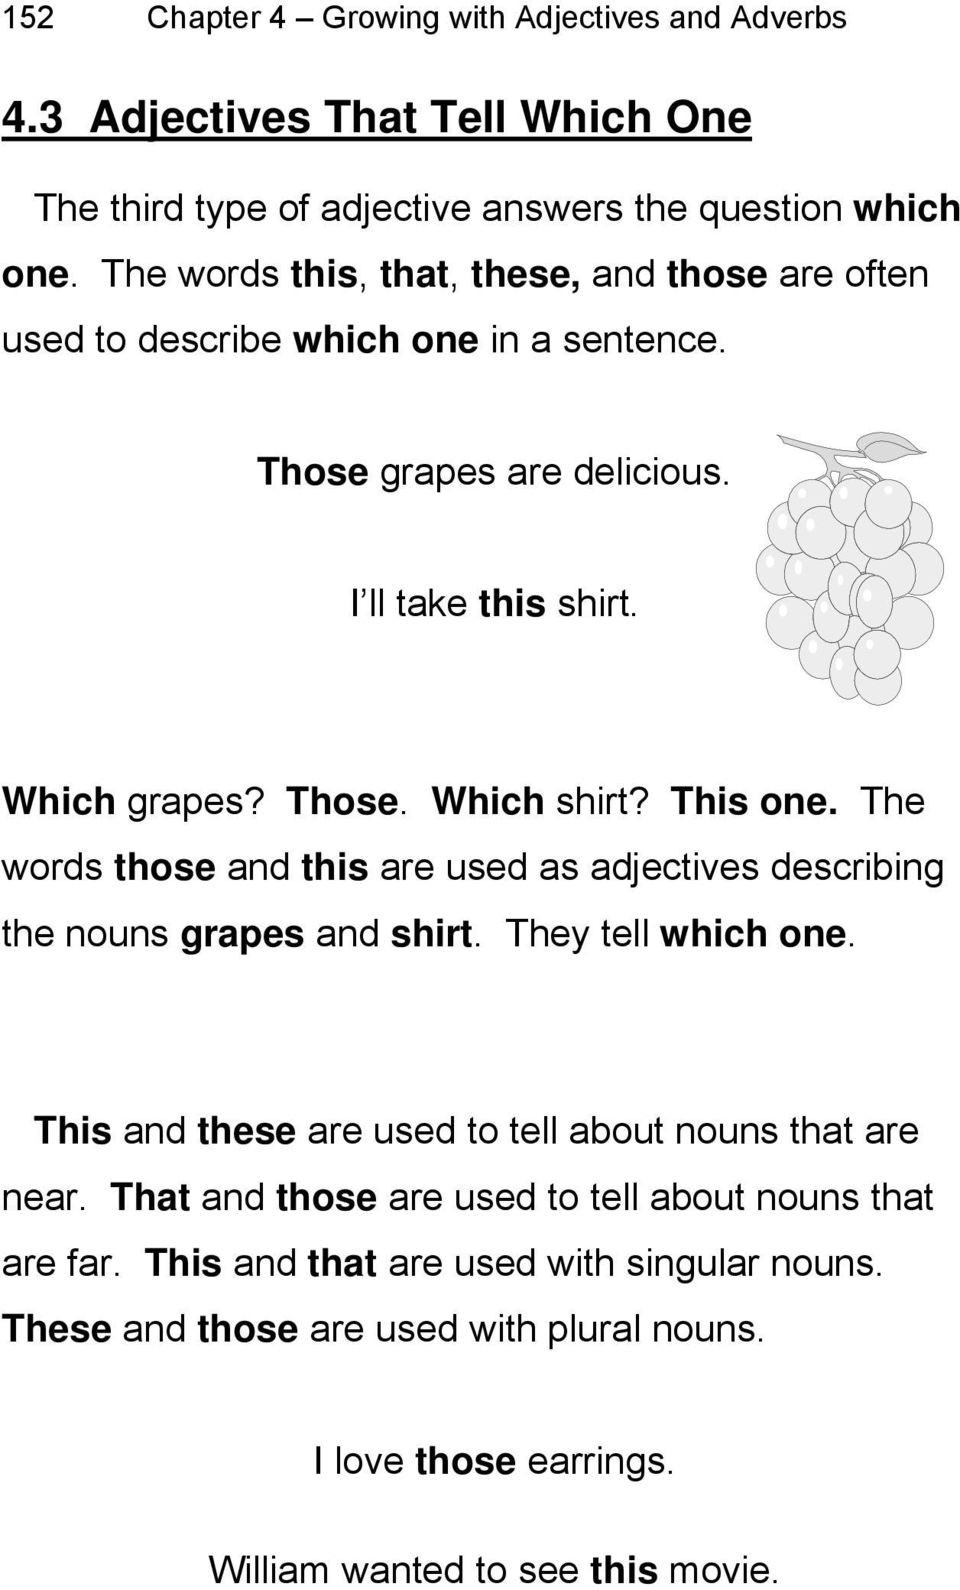 This one. The words those and this are used as adjectives describing the nouns grapes and shirt. They tell which one.